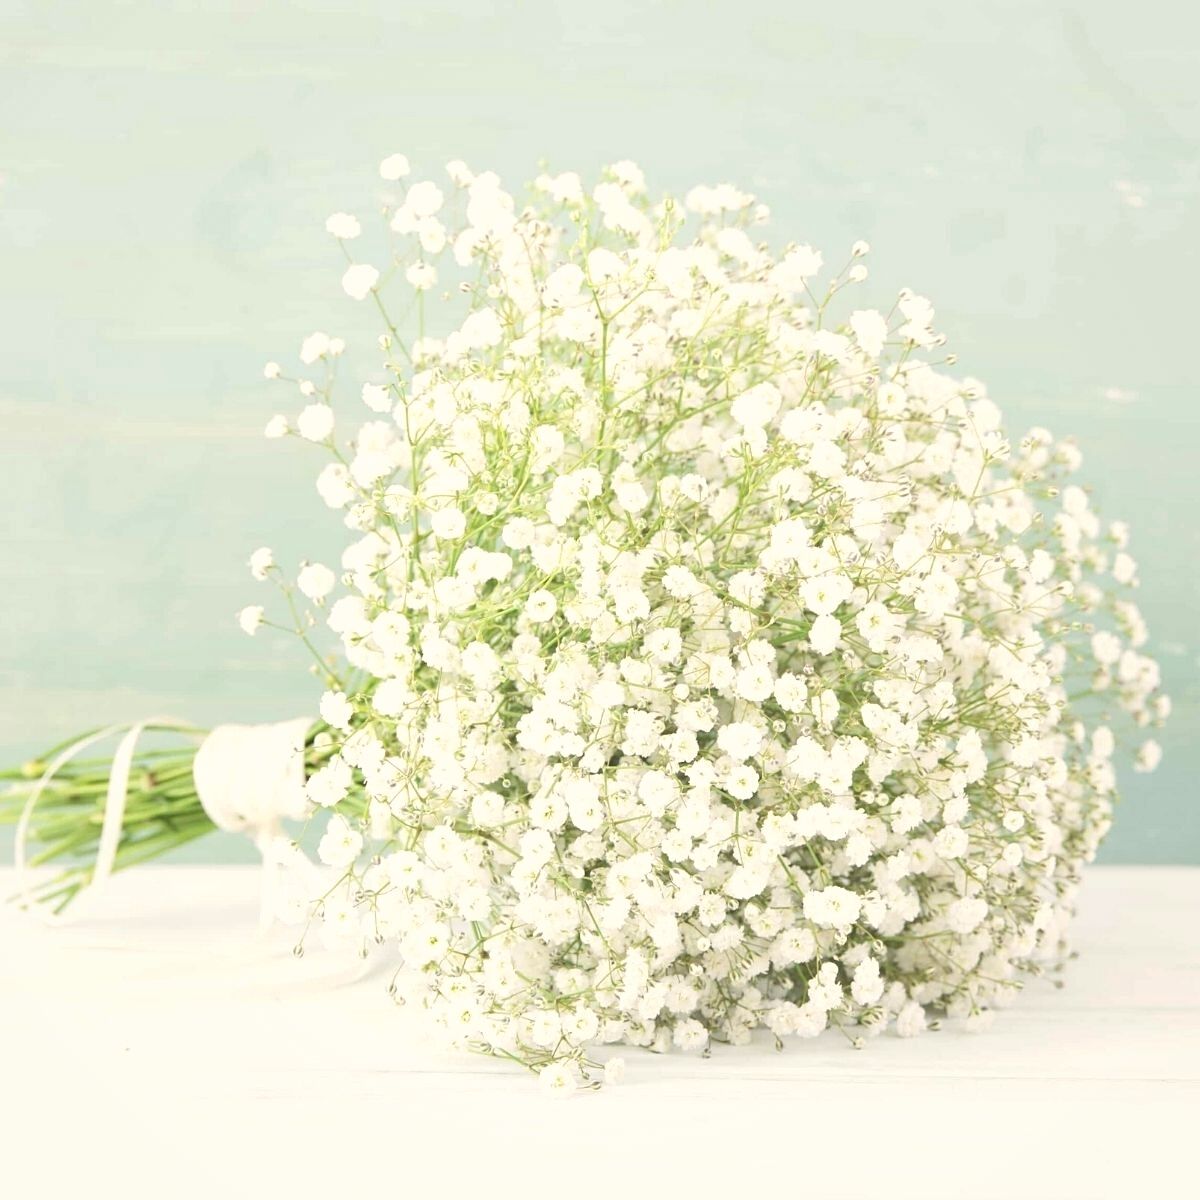 gypsophila-aka-babys-breath-is-the-all-time-favorite-filler-flower-featured